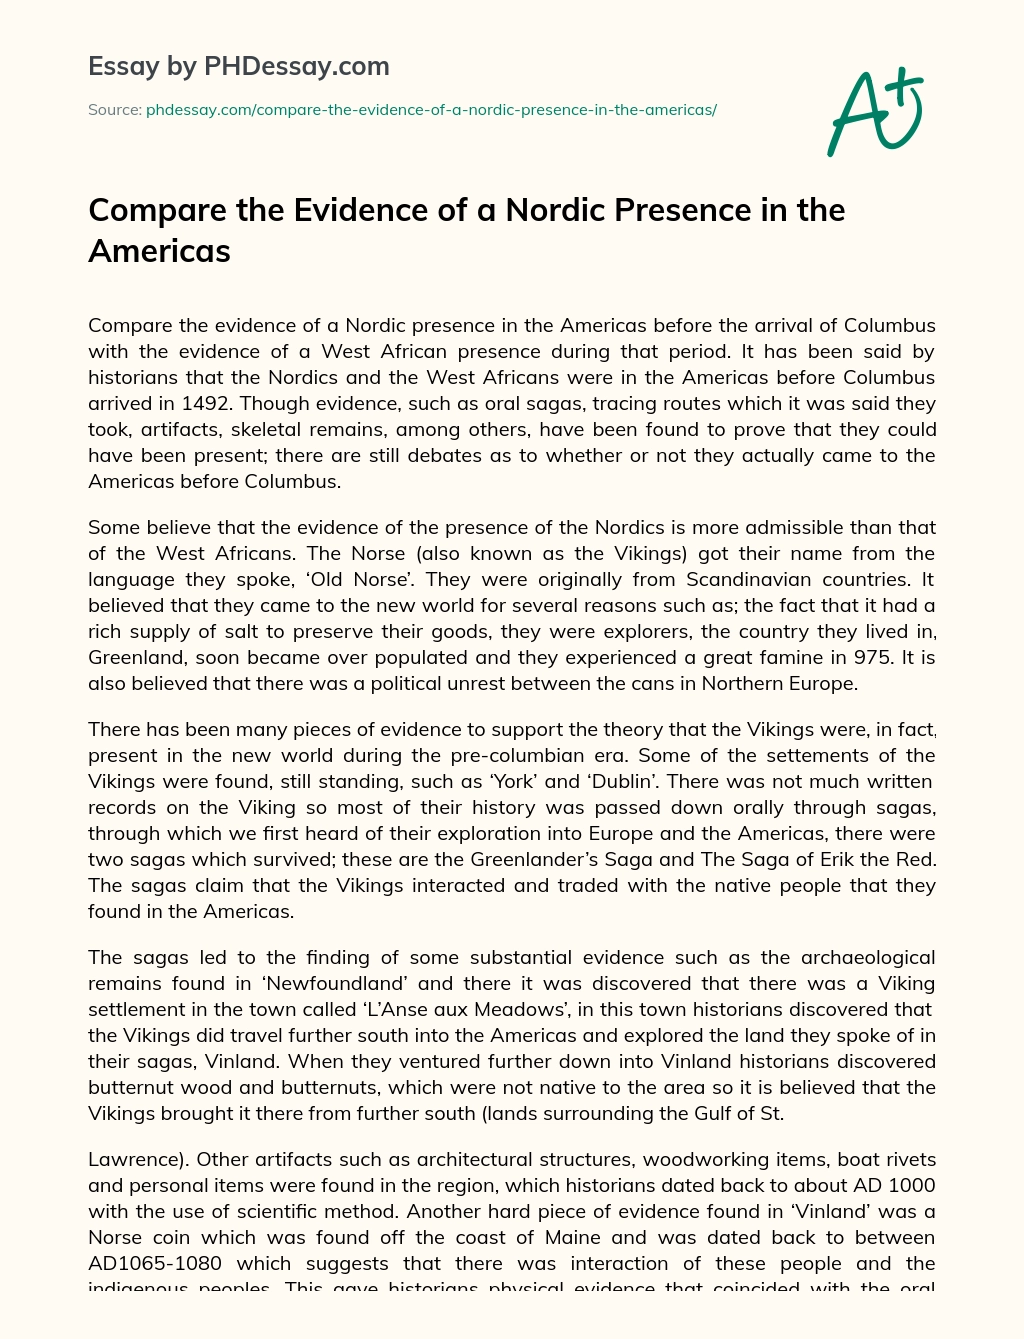 Compare the Evidence of a Nordic Presence in the Americas essay